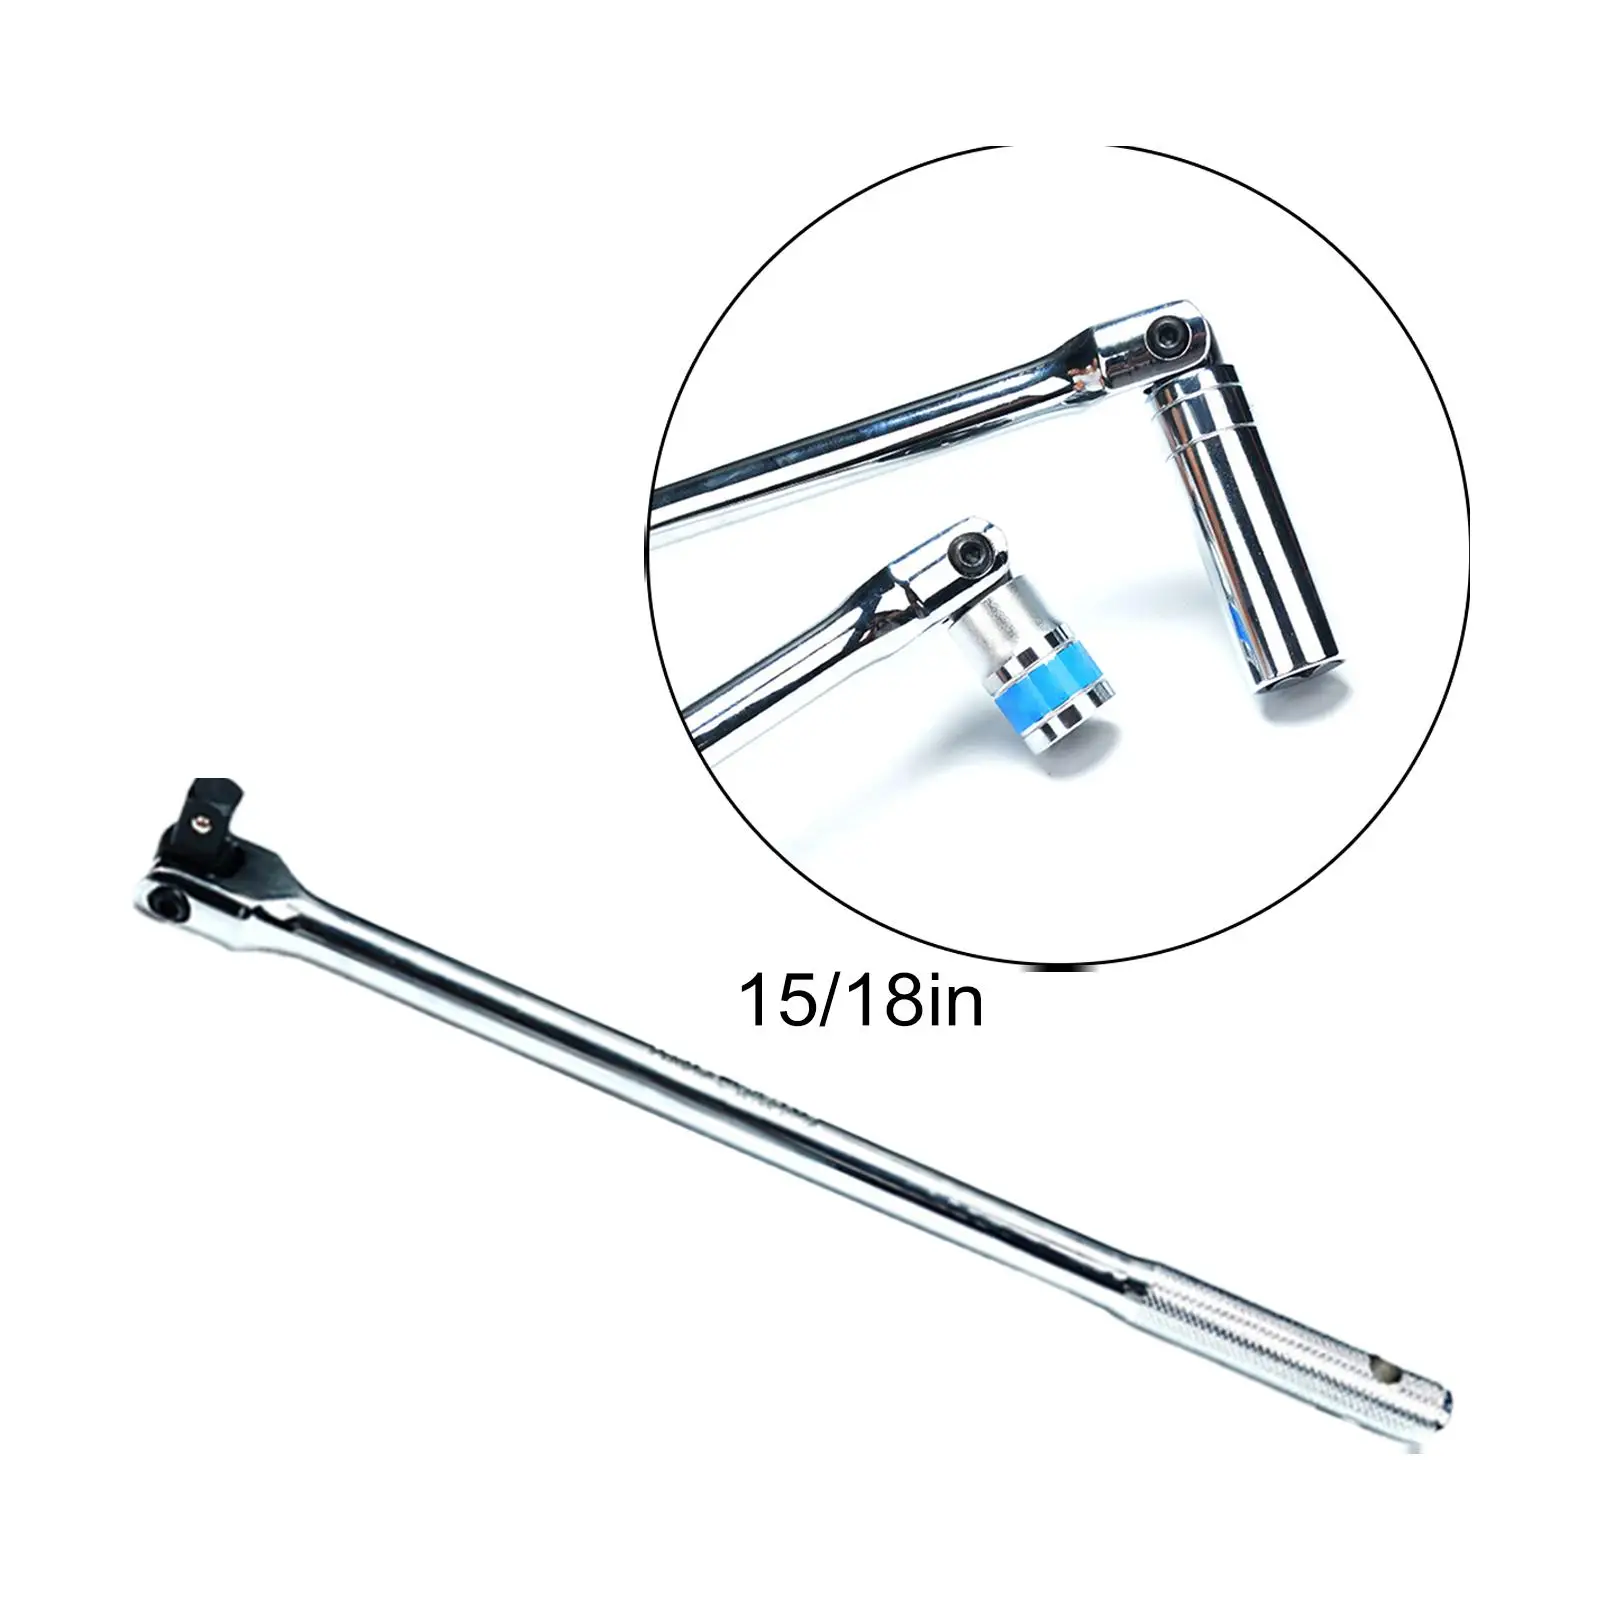 Head Socket Wrench Durable Adjustable Torque Wrench Head Strong Lever Long Force Bar Activity for Repairing Maintenance durable